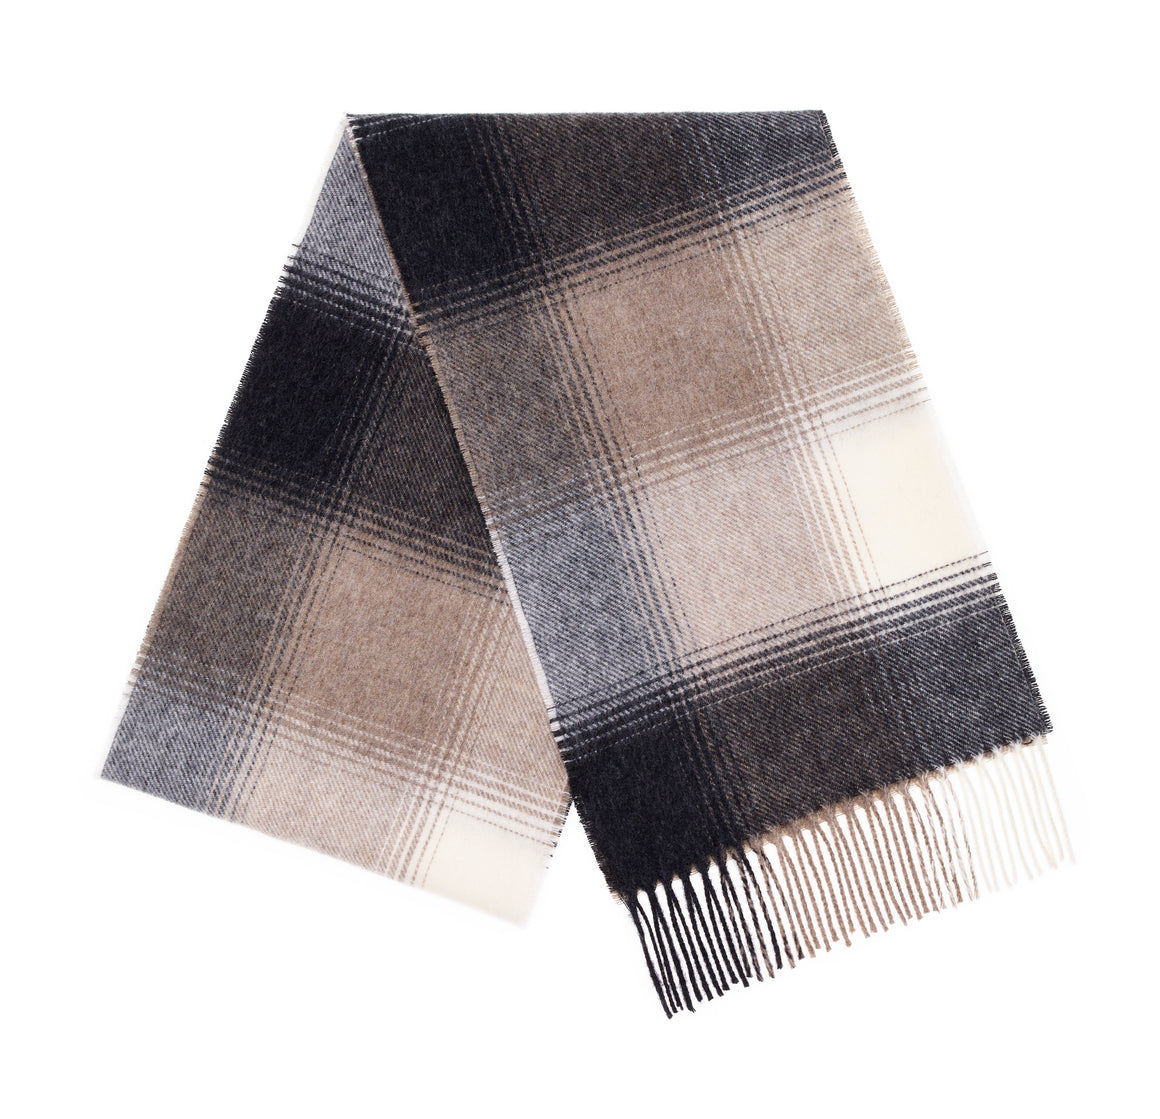 Merino Lambswool Scarf - Beckett Natural - Made in England,